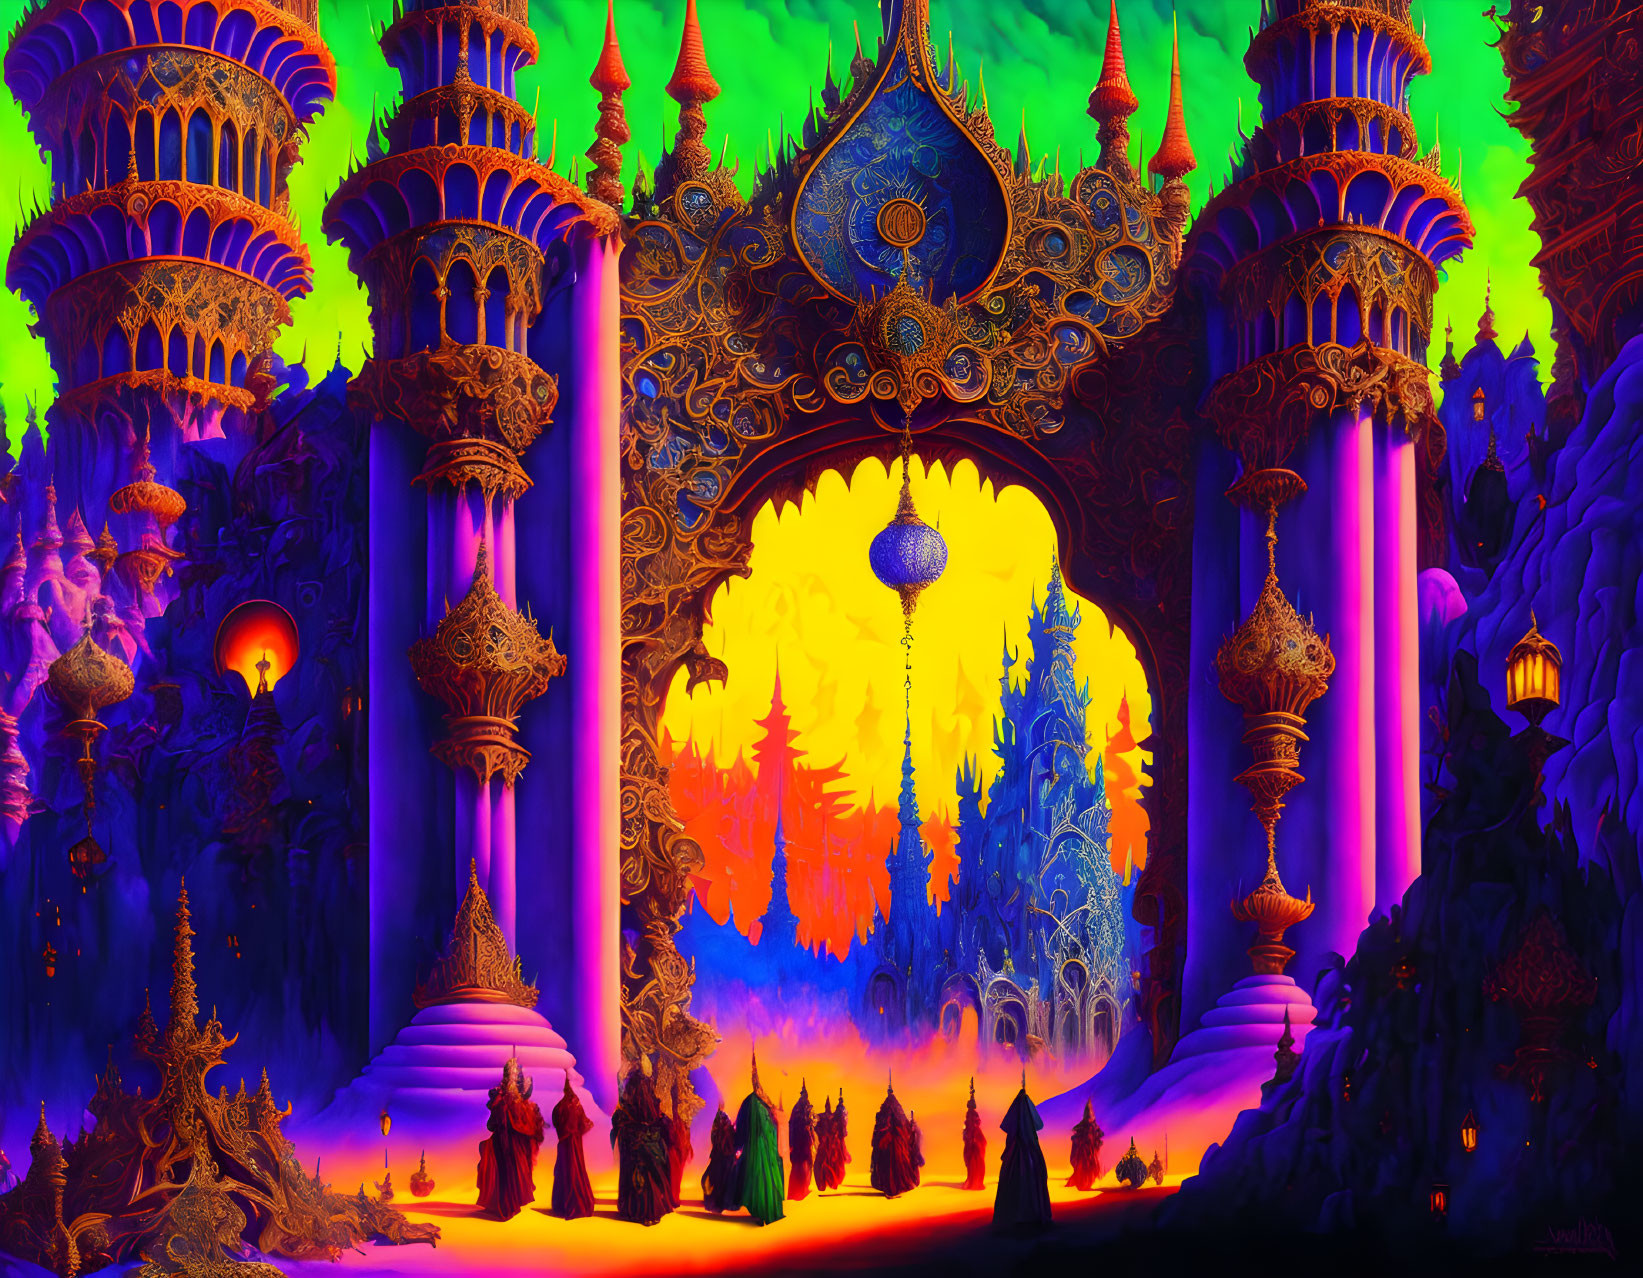 Fantastical landscape with ornate pillars and silhouetted figures at sunset